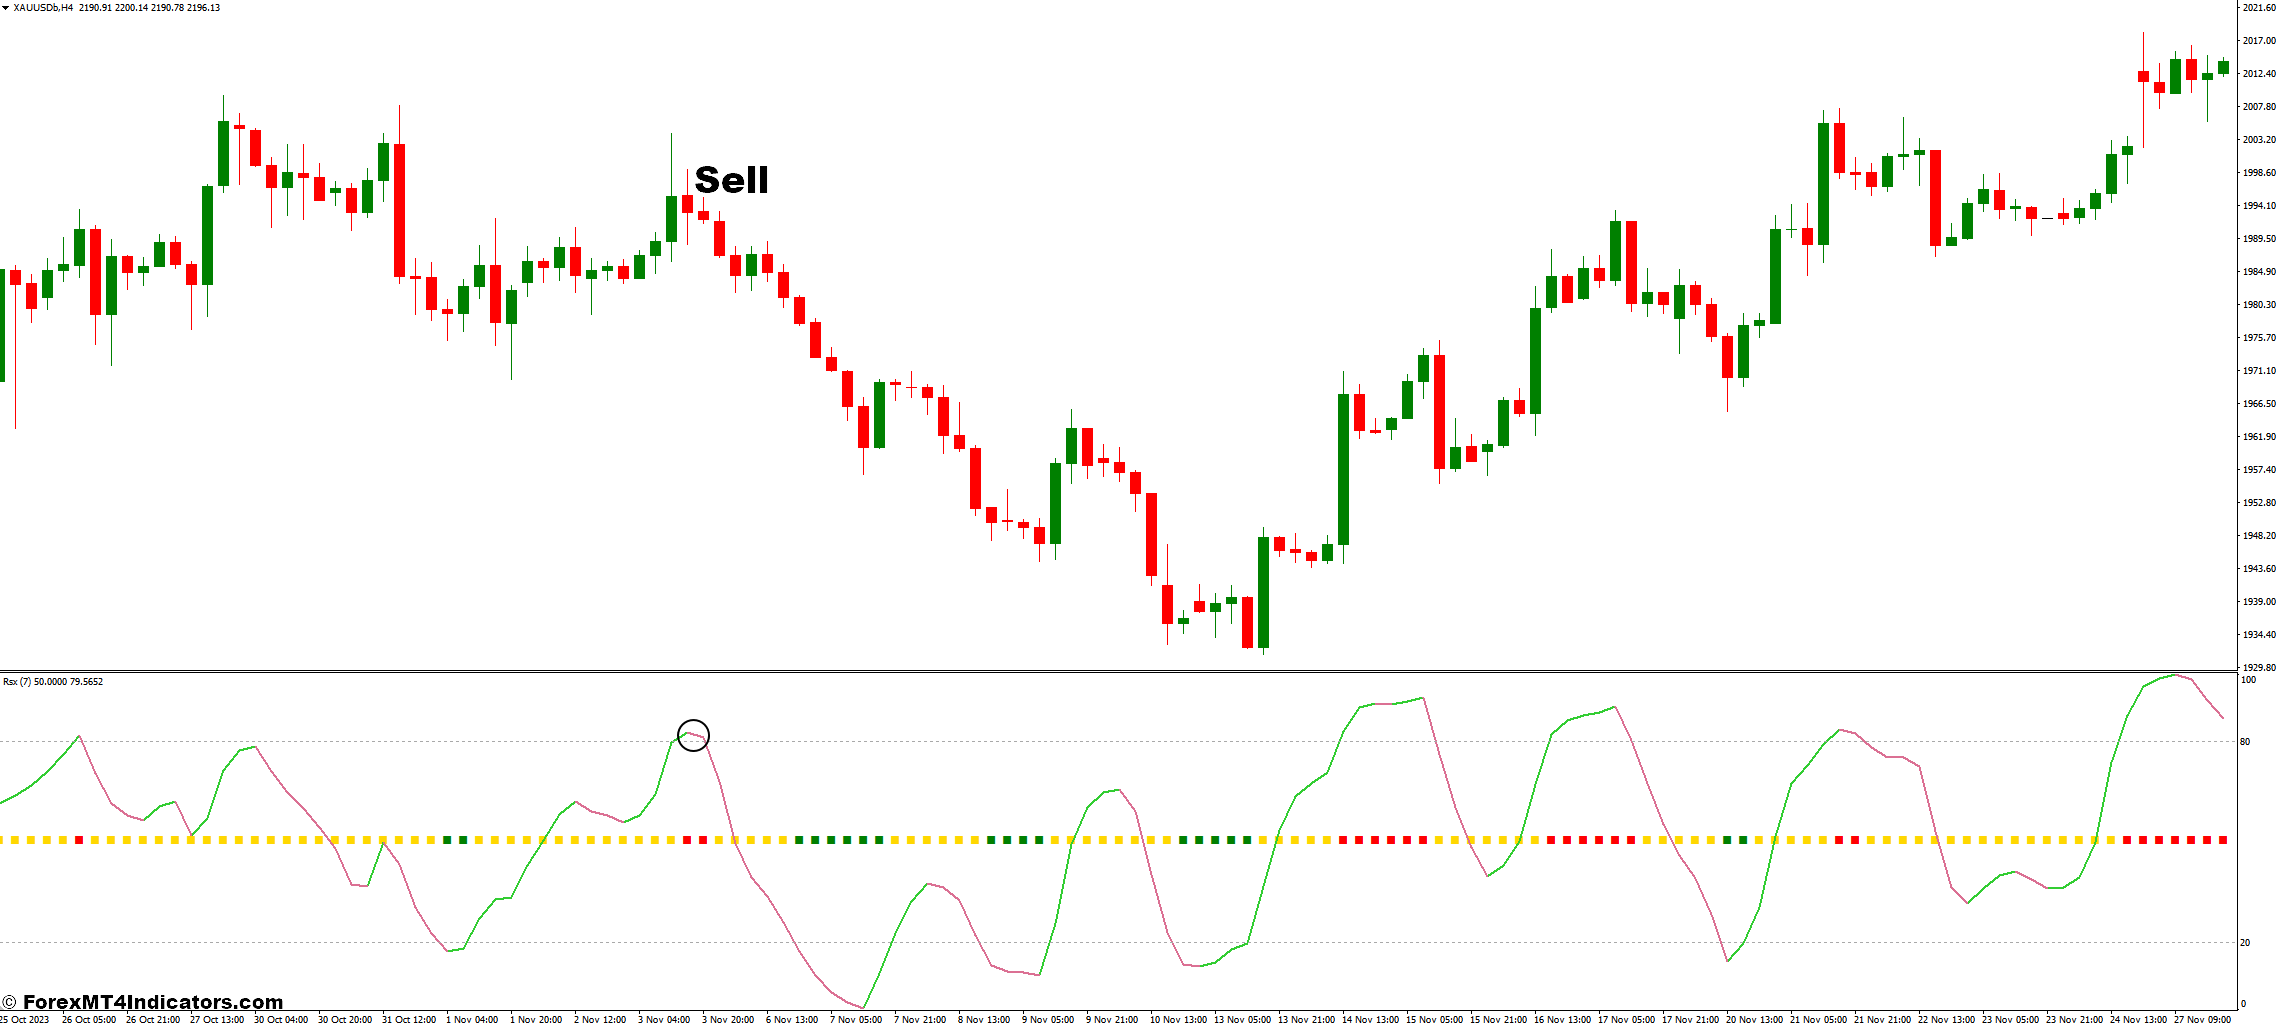 How to Trade with RSX Indicator - Sell Entry